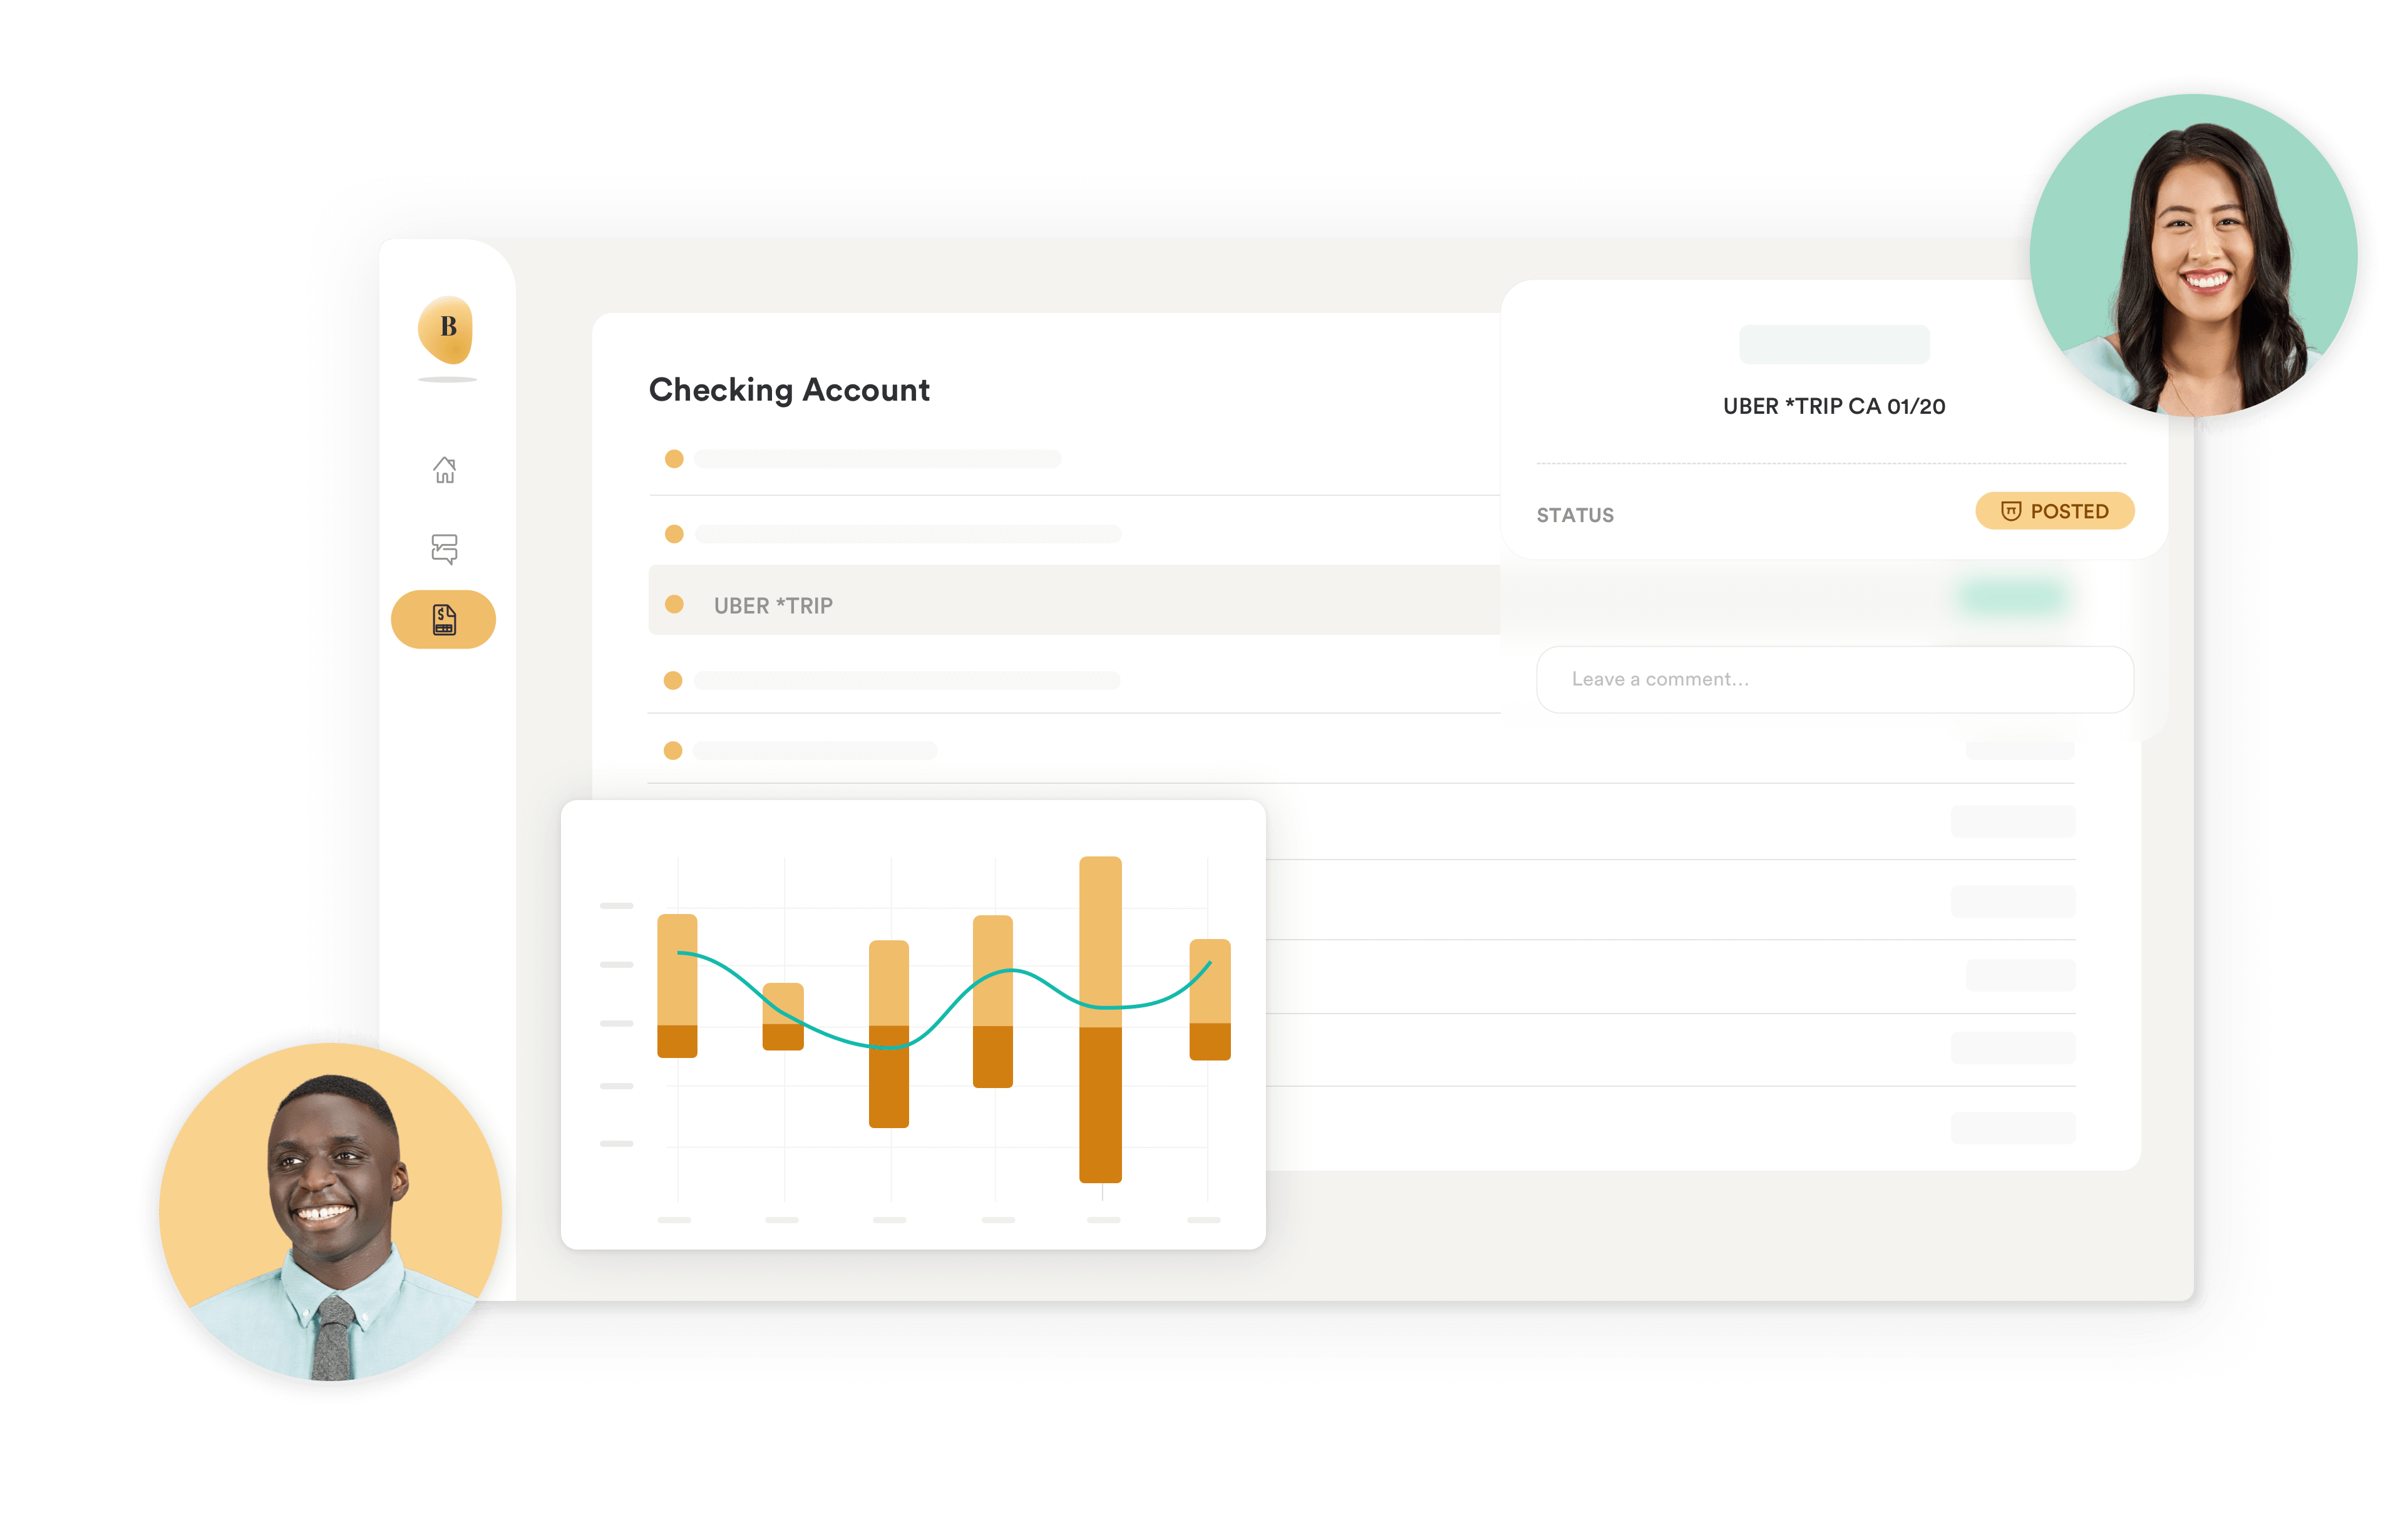 Bench V2 - announcement post - checking account screen with report